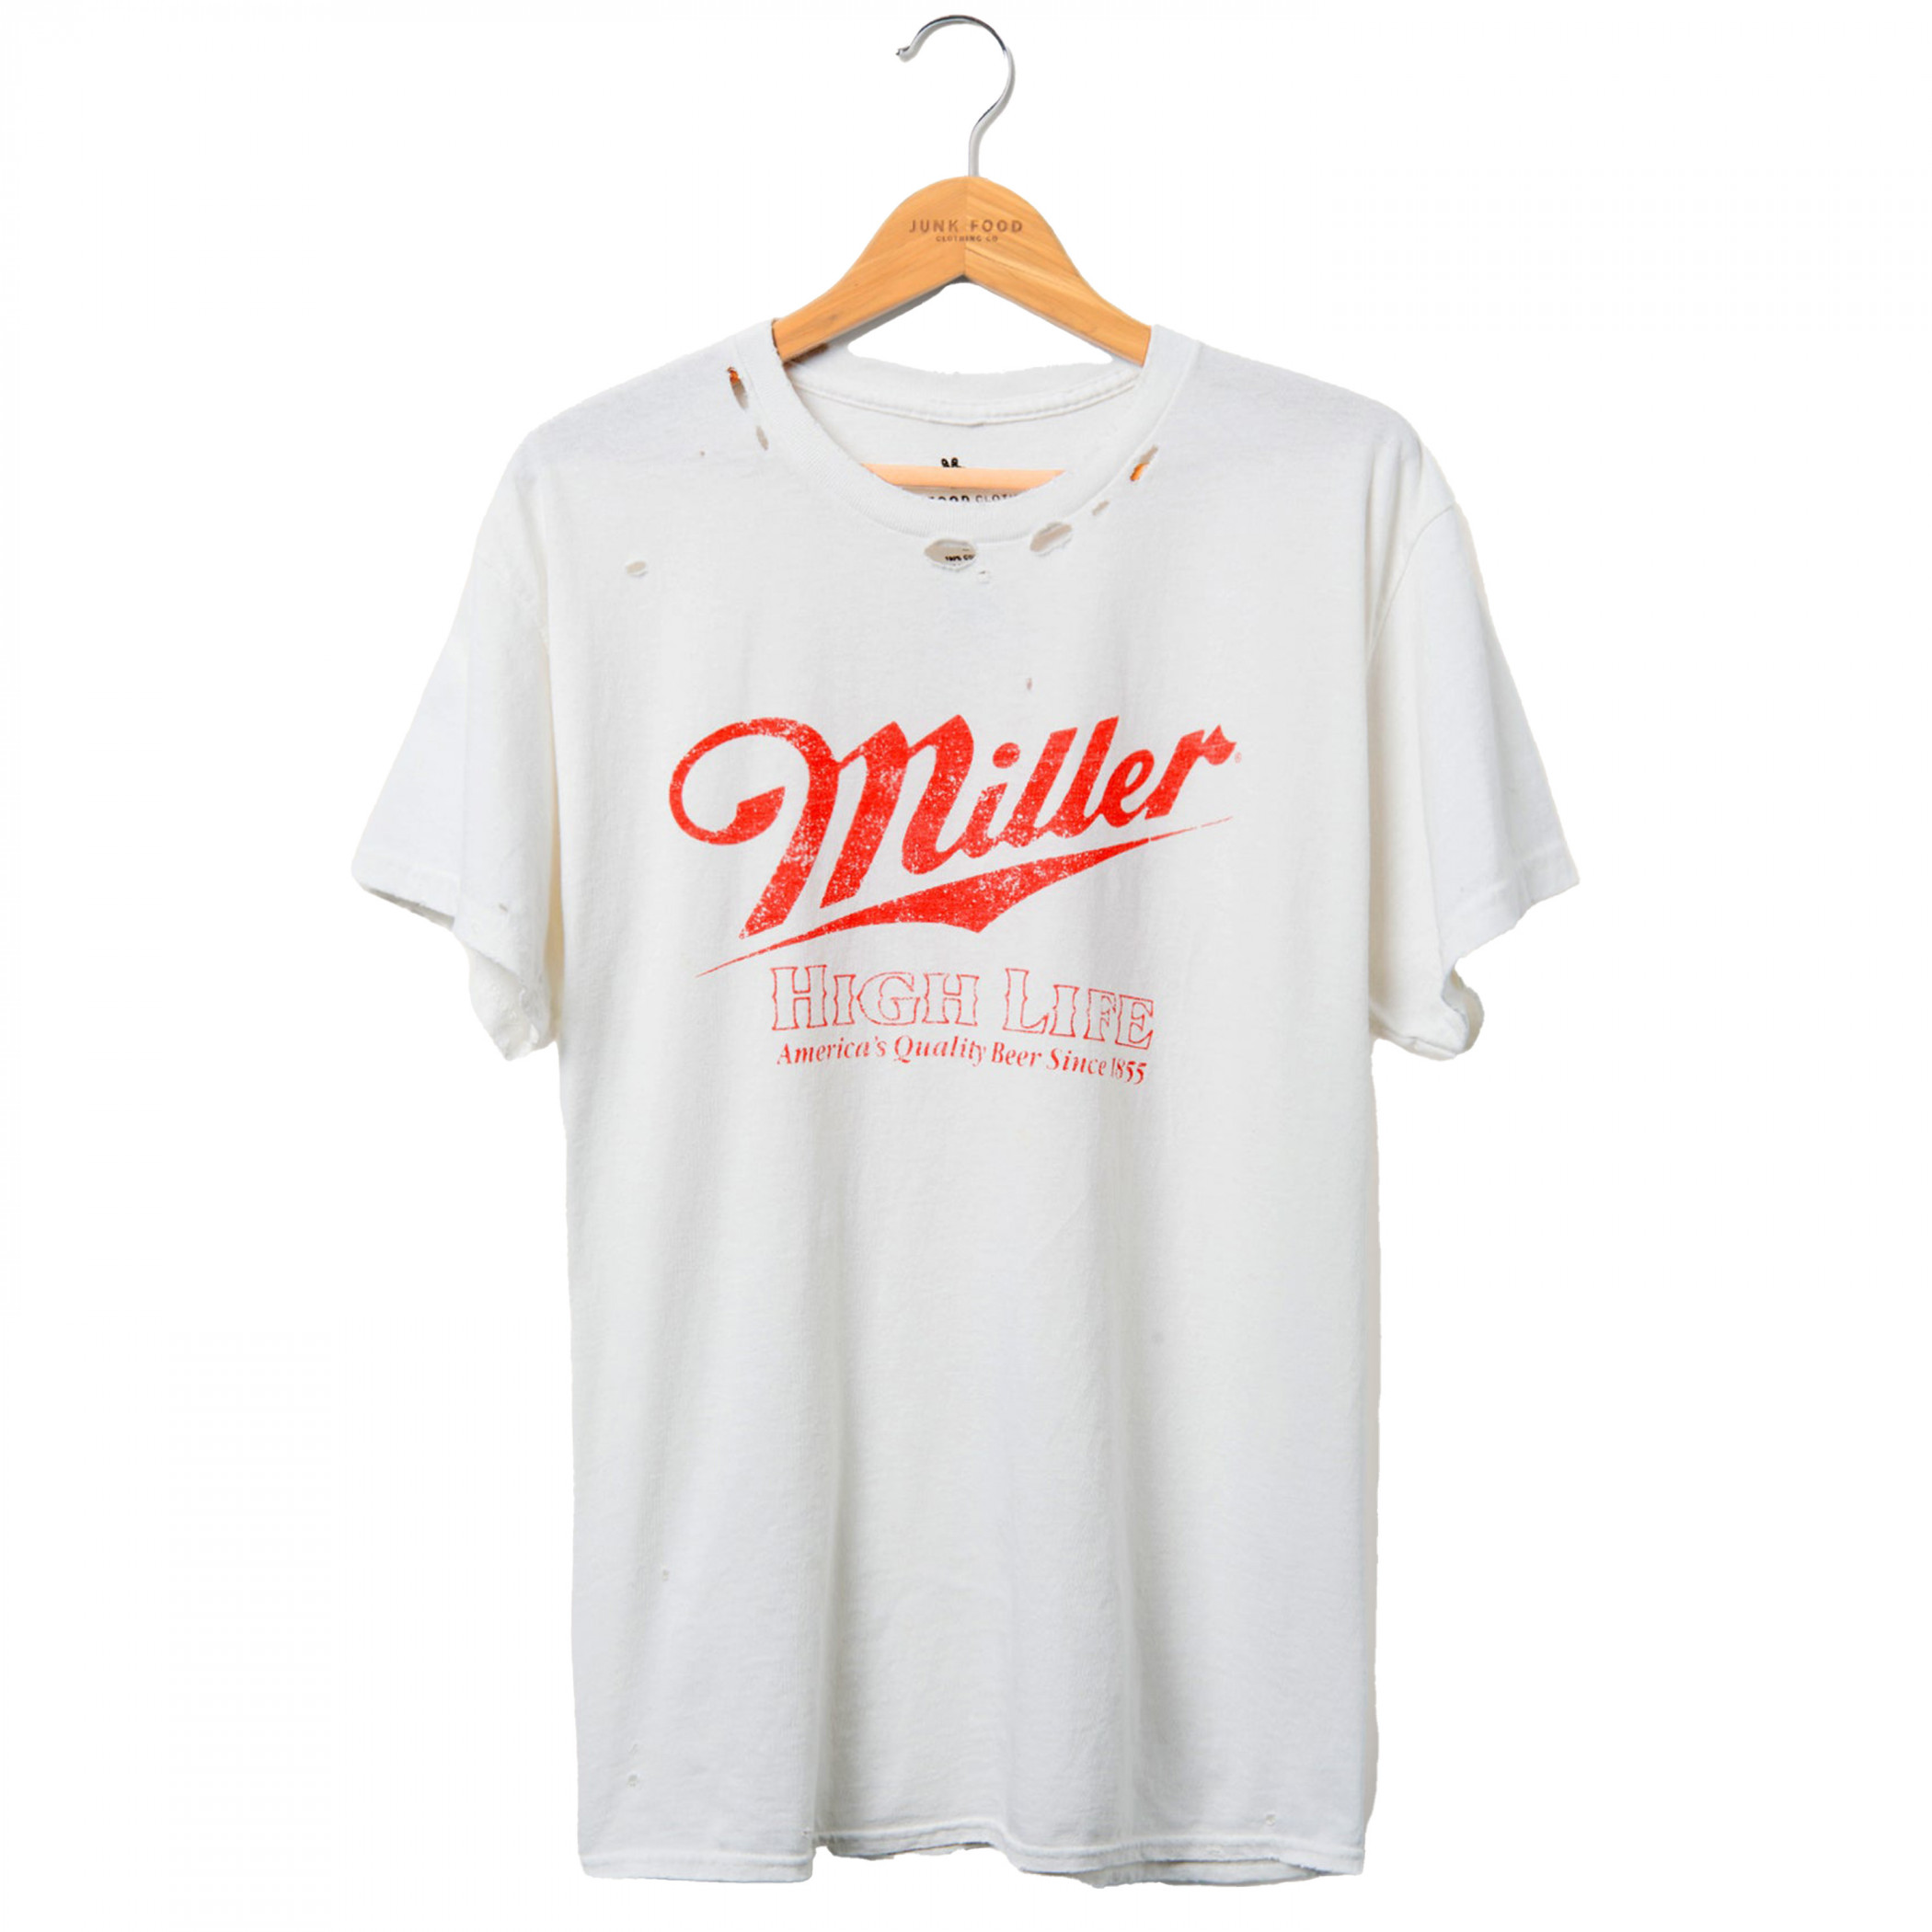 Miller High Life Eagle Front and Back Print T-Shirt by Junk Food